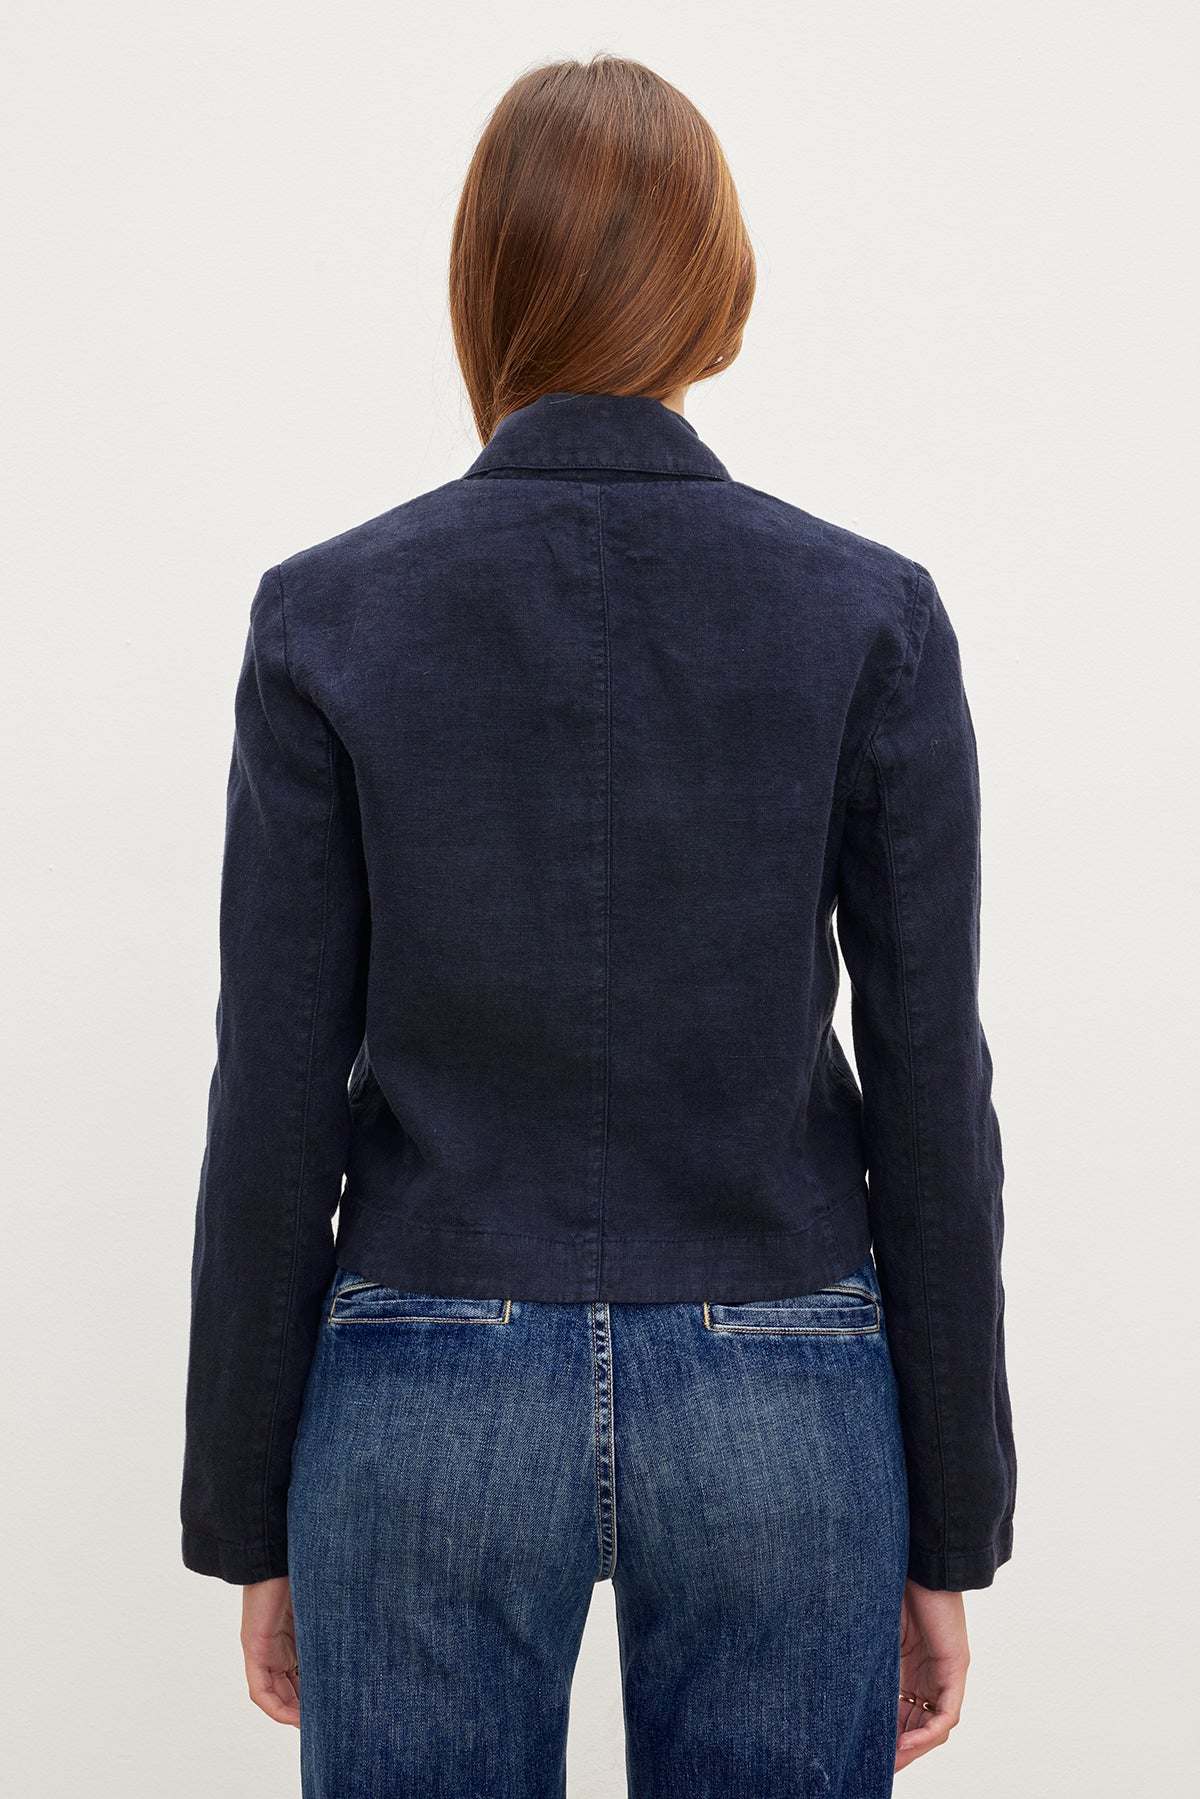 The back view of a woman wearing FINLEY HEAVY LINEN CROPPED BLAZER by Velvet by Graham & Spencer jeans and a blue jacket.-35982562721985